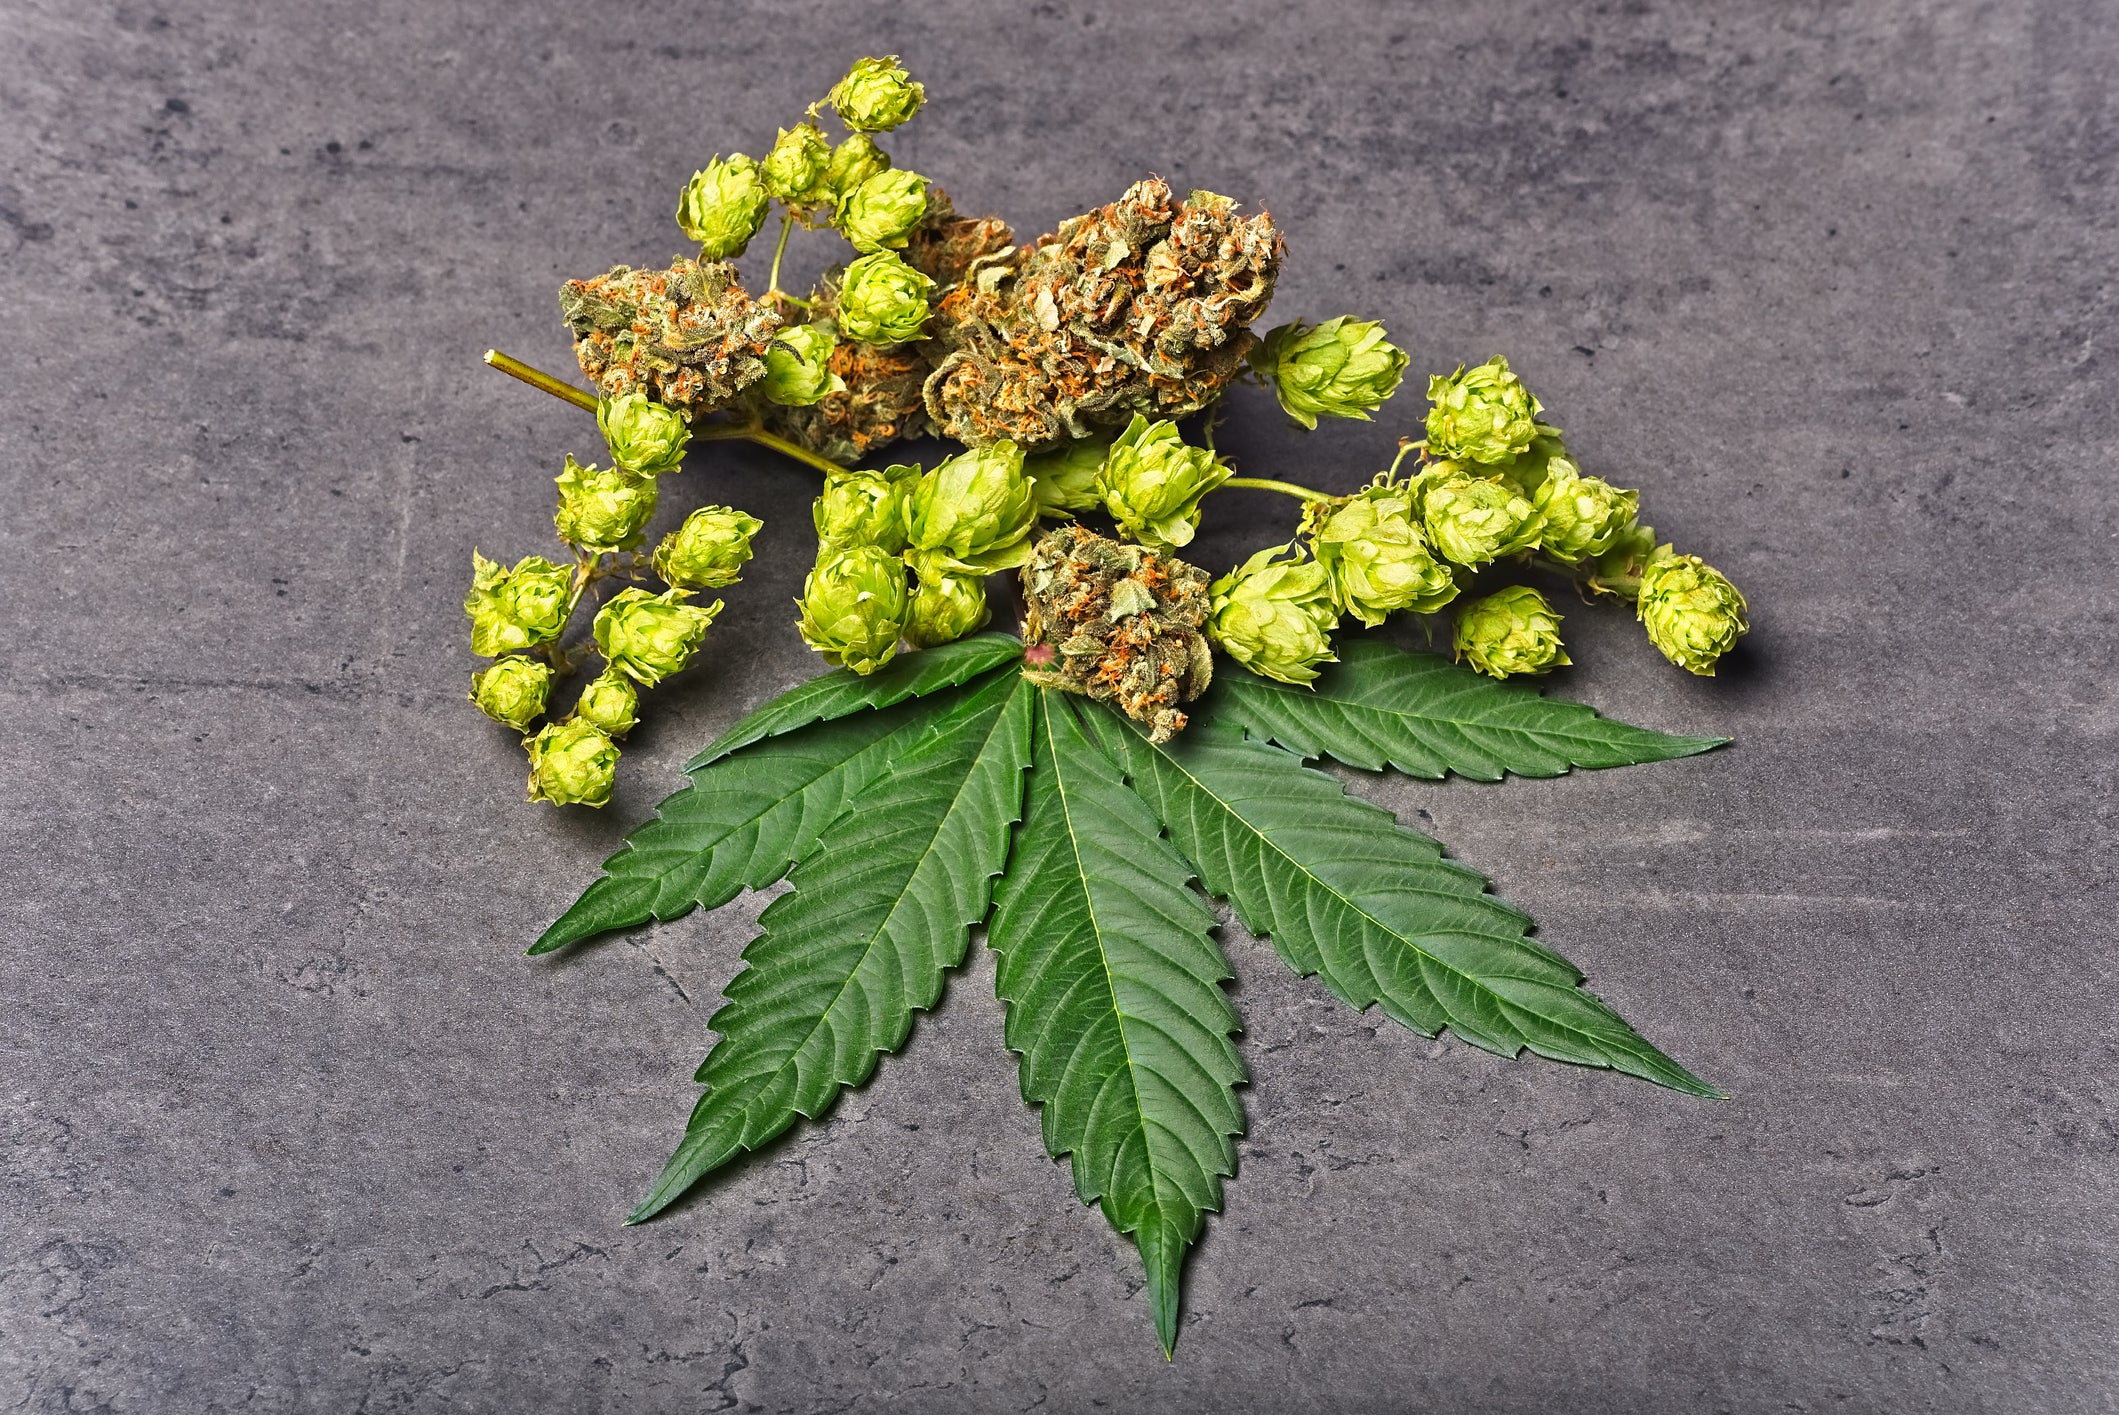 Cannabis flower nugs and leaf lie on a gray surface next to a dry hoppy with the same terpene humulene.